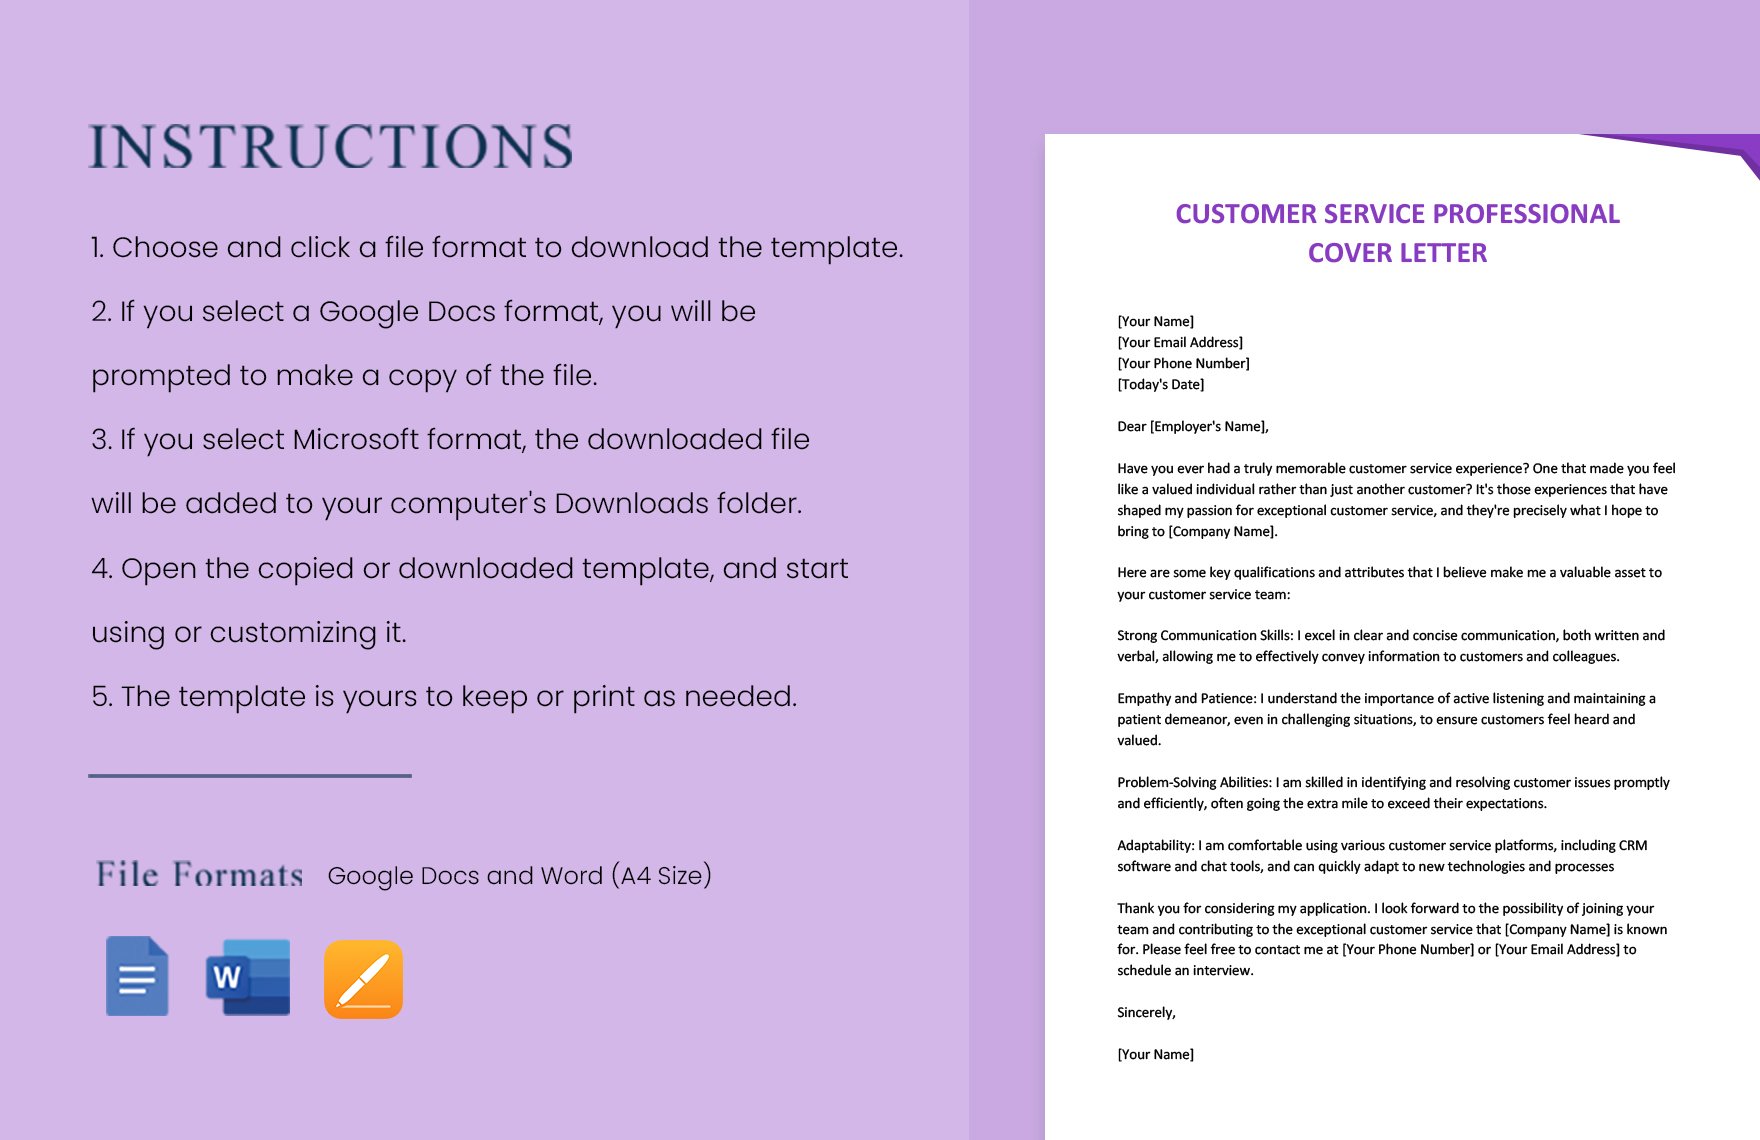 Customer Service Professional Cover Letter